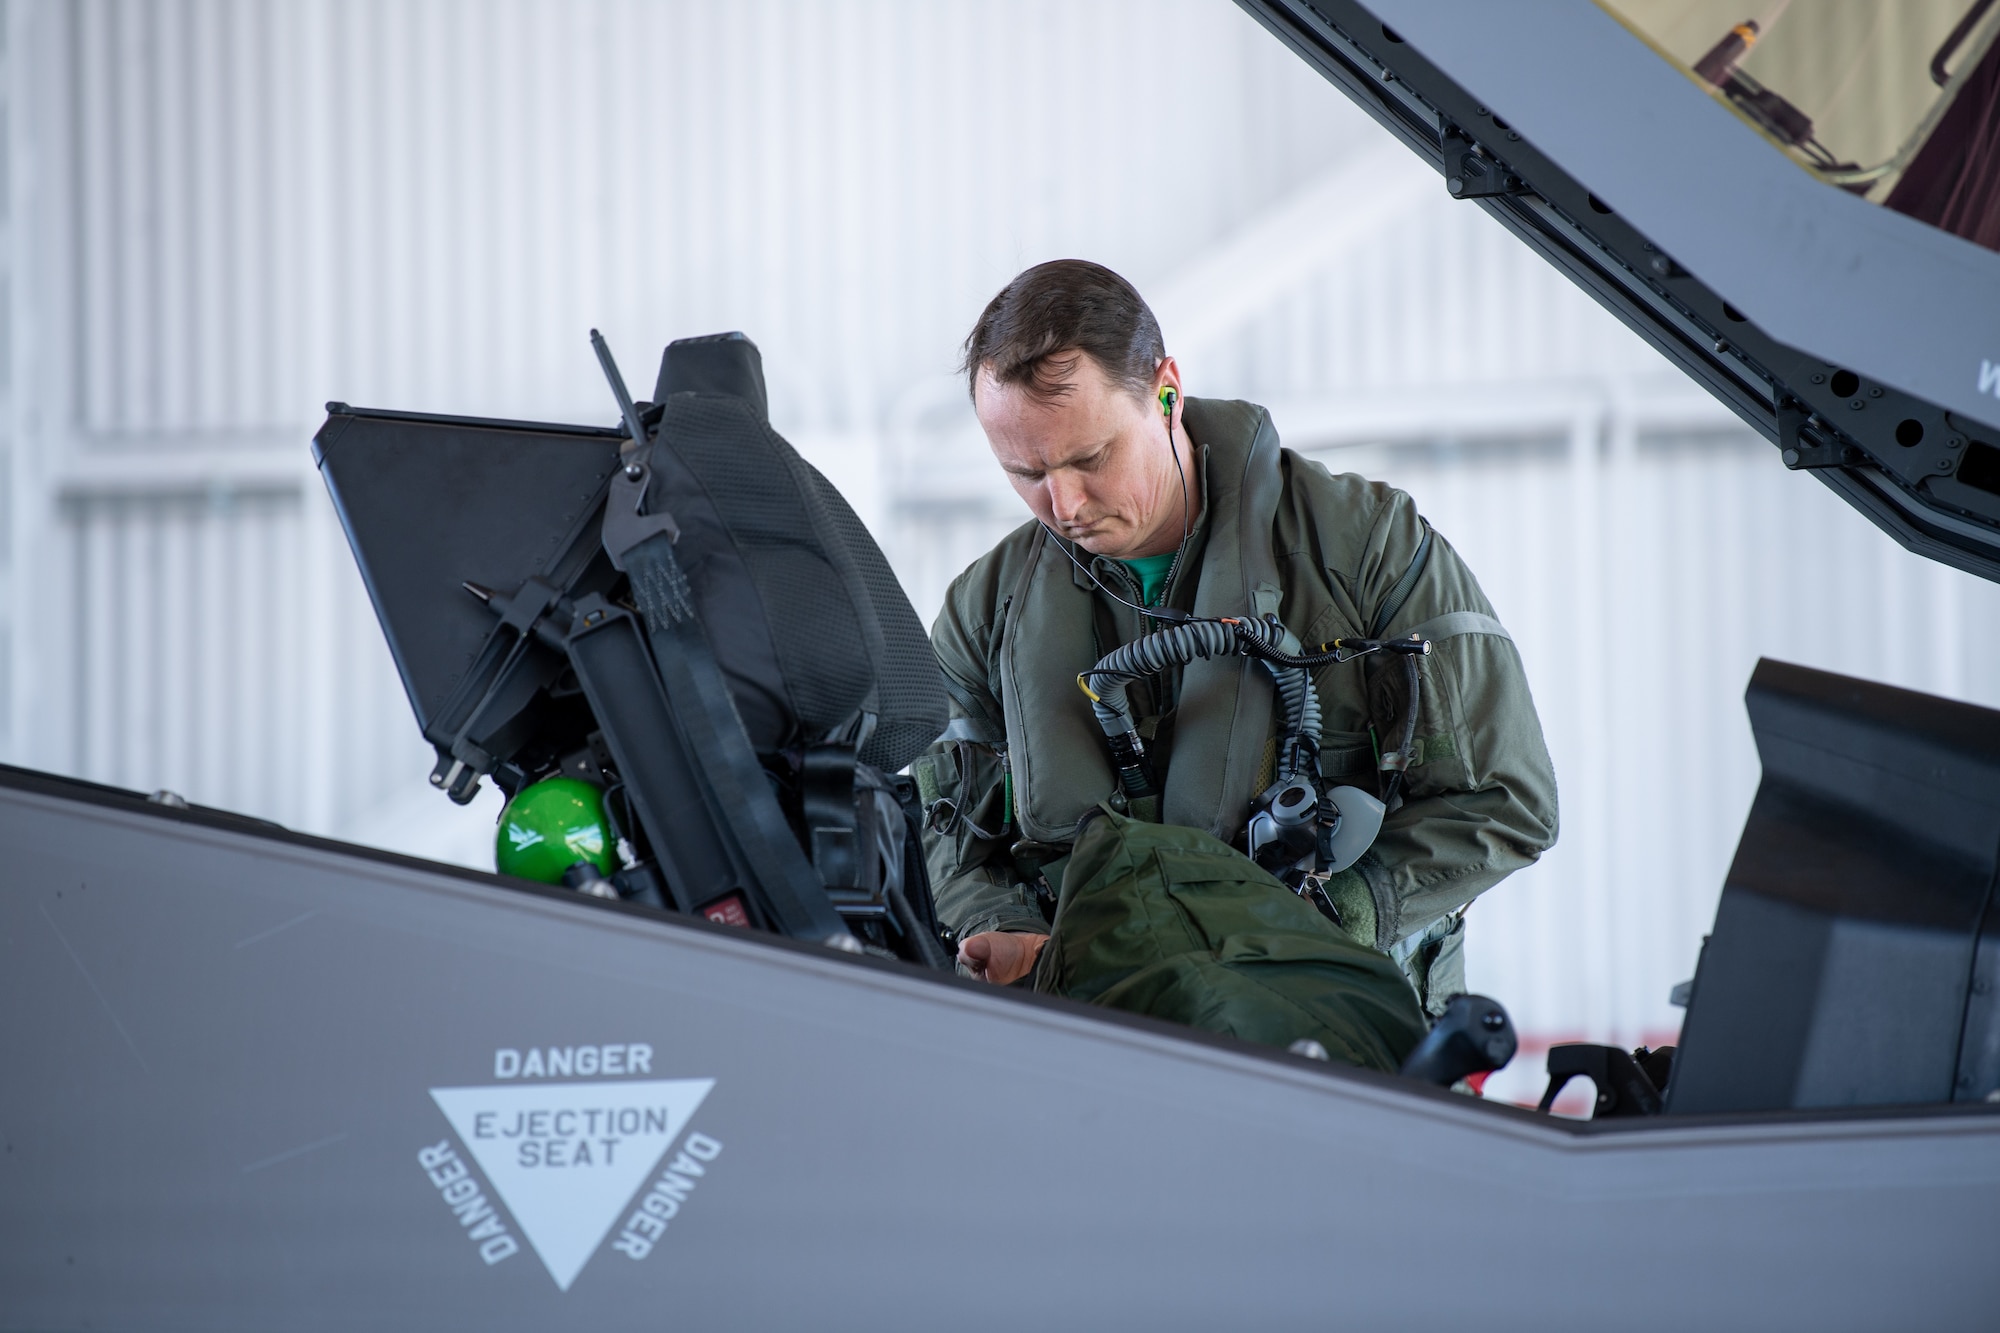 Maj. Howard “Cash” Shaner, F-35A Lightning II pilot assigned to the 134th Fighter Squadron, Vermont Air National Guard, exits an F-35 at the Vermont Air National Guard base, South Burlington, Vermont, March 12, 2021. Shaner is the first ever Air National Guard F-35 pilot to graduate from the highly competitive U.S. Air Force Weapons School. (U.S. Air National Guard photo by Mrs. Julie M. Paroline)